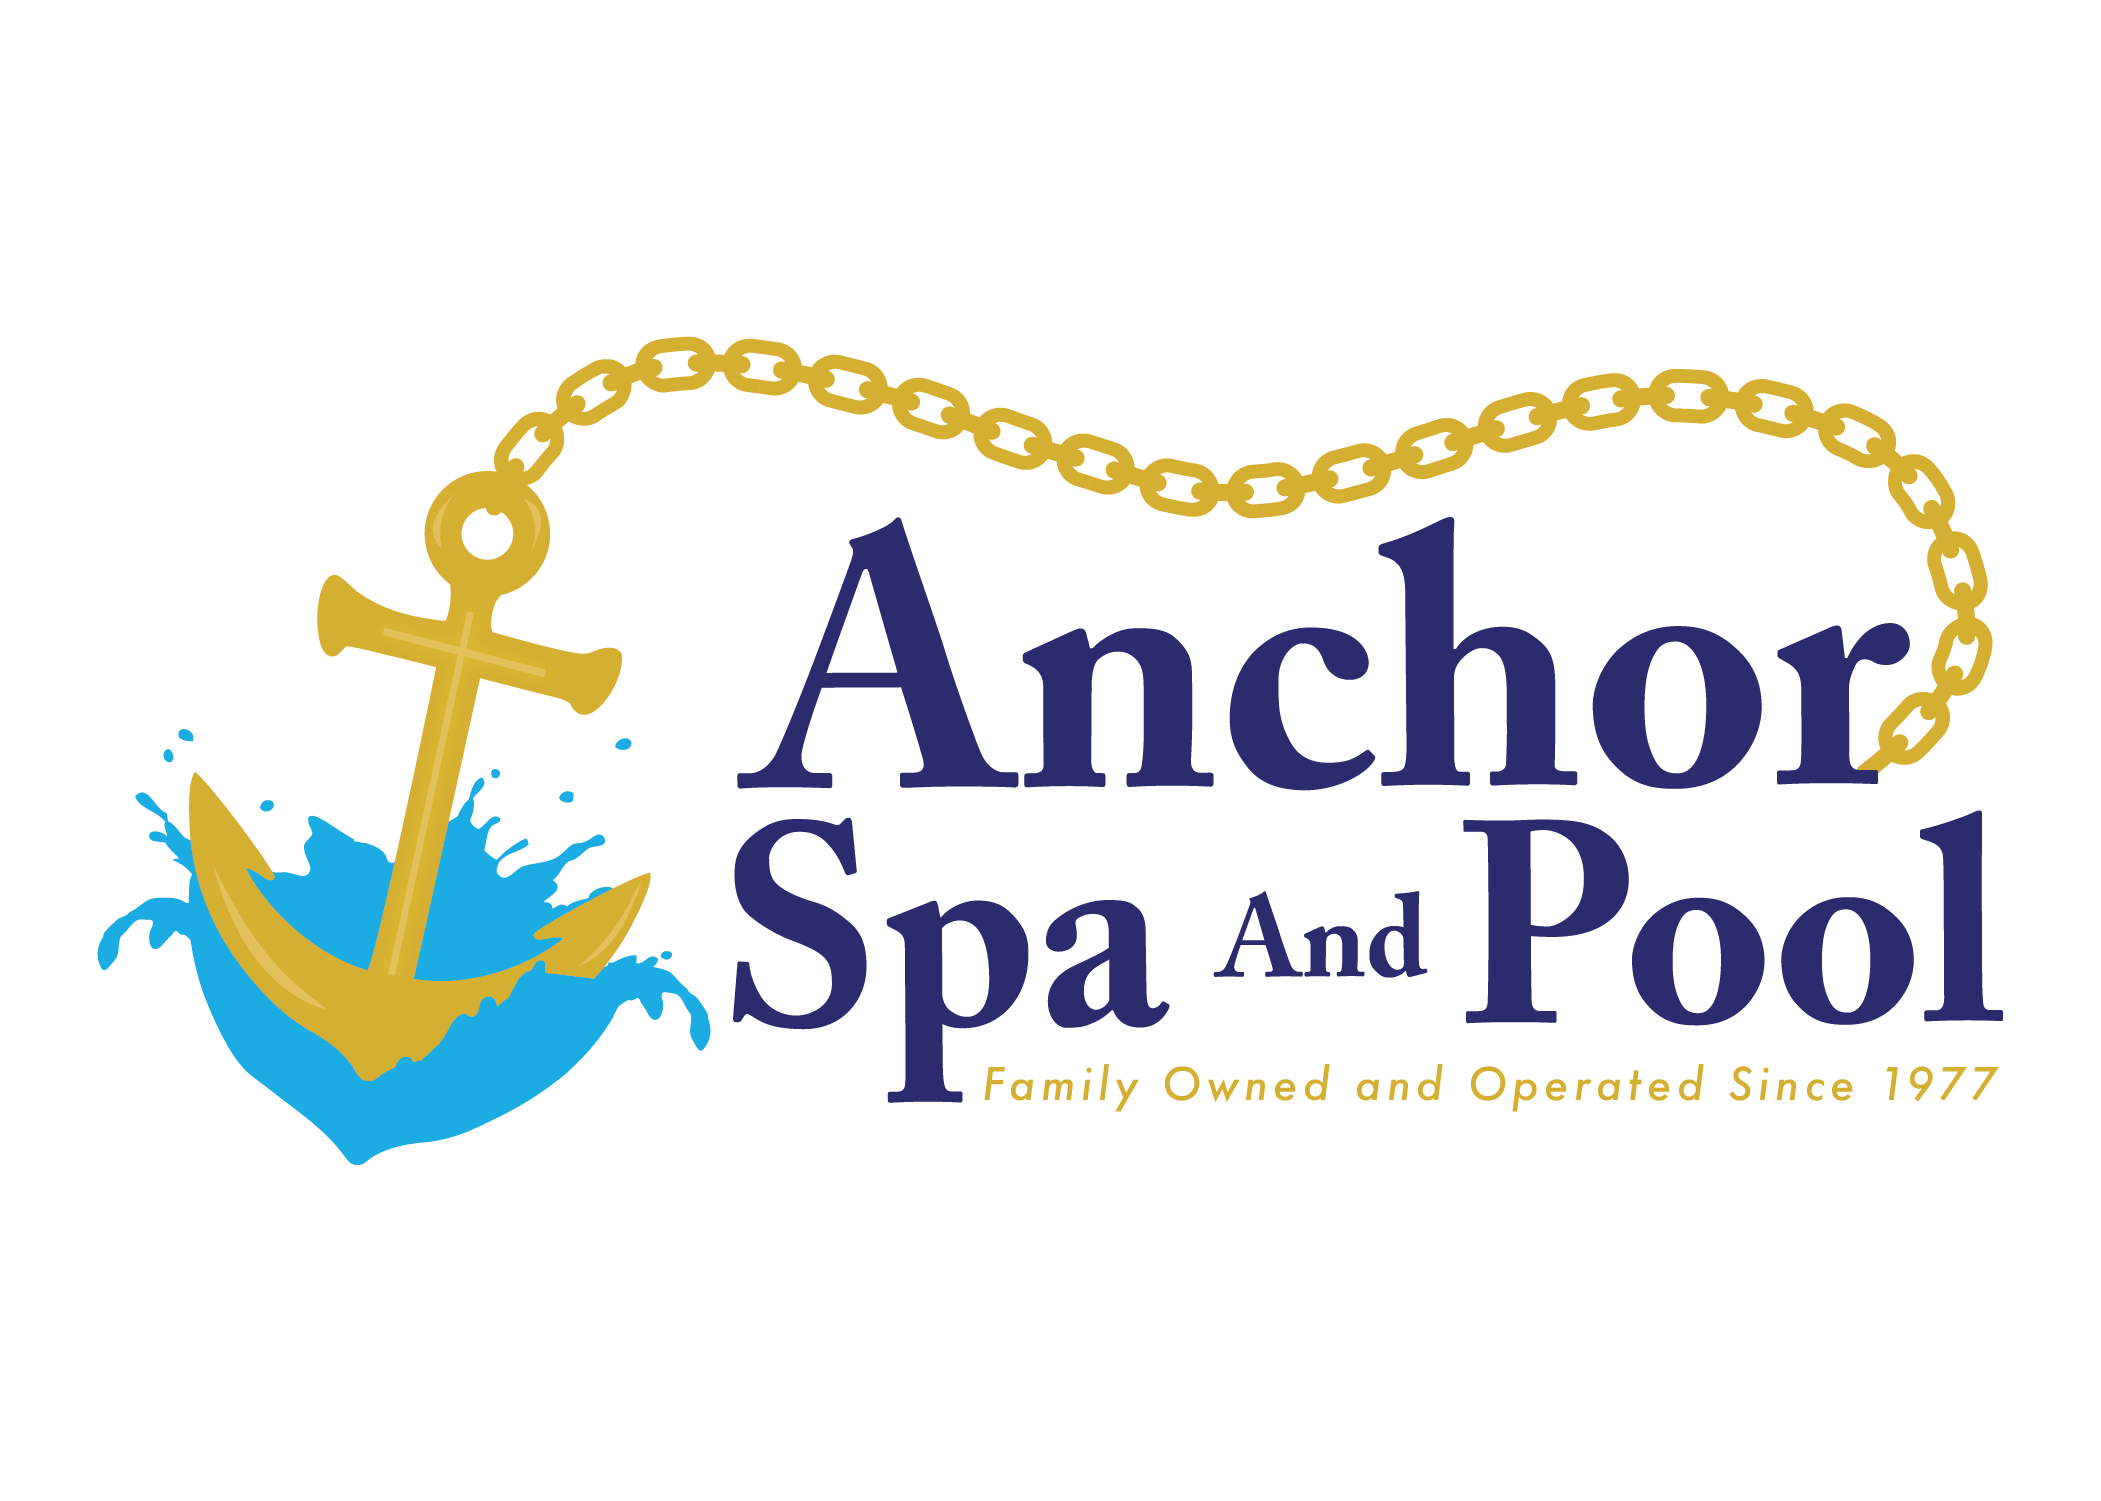 Anchor Spa and Pool